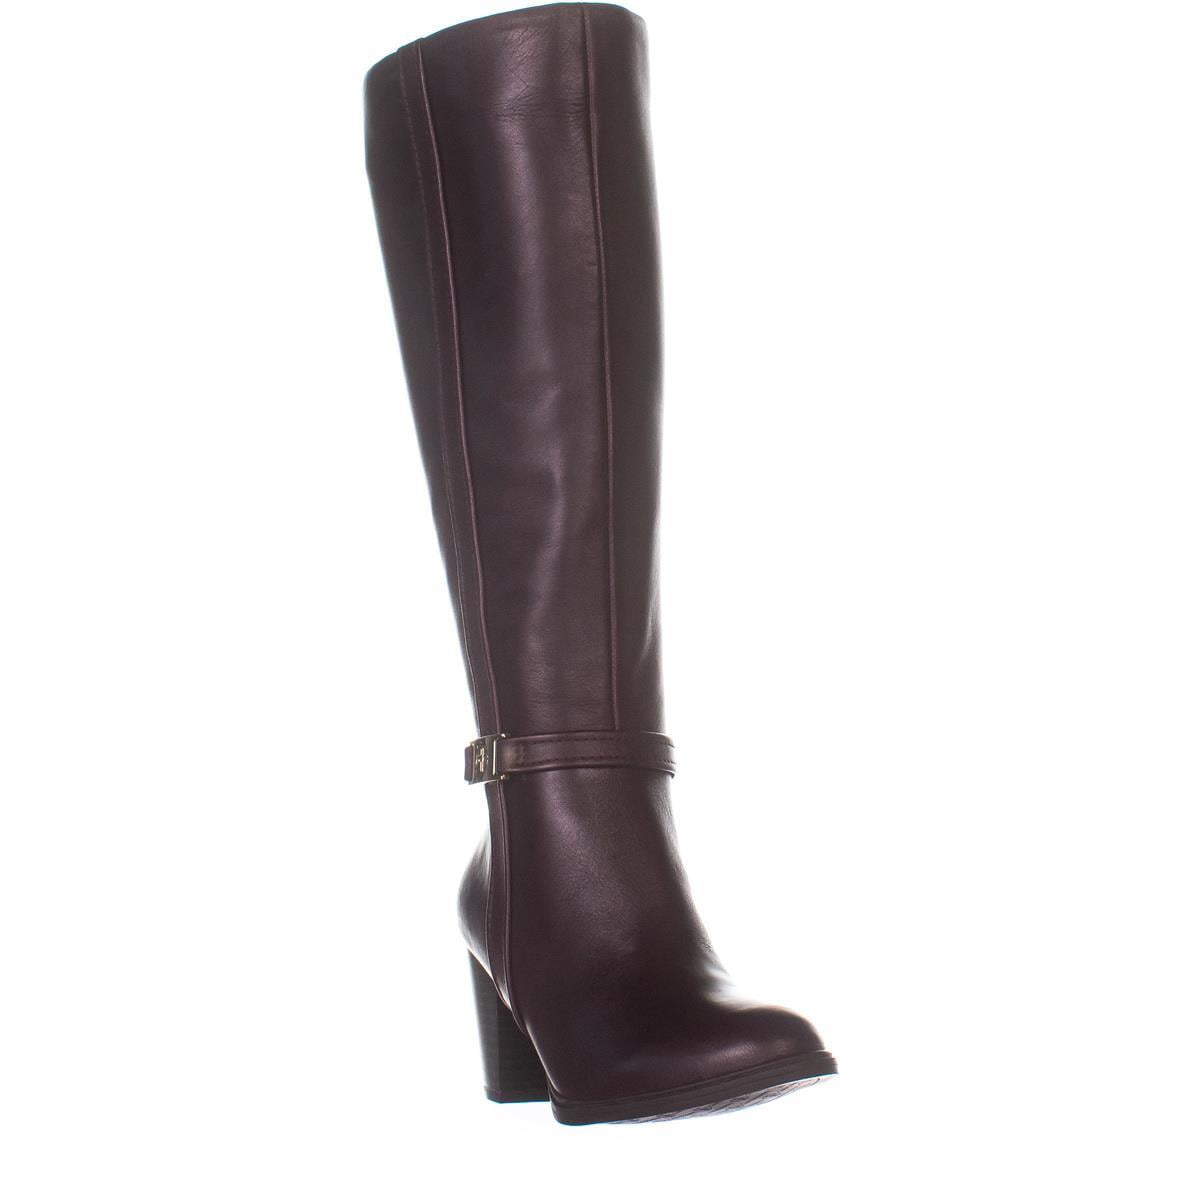 Ovation Olympia Tall Show Riding Boots with Leather Upper and Square Toe Cap 